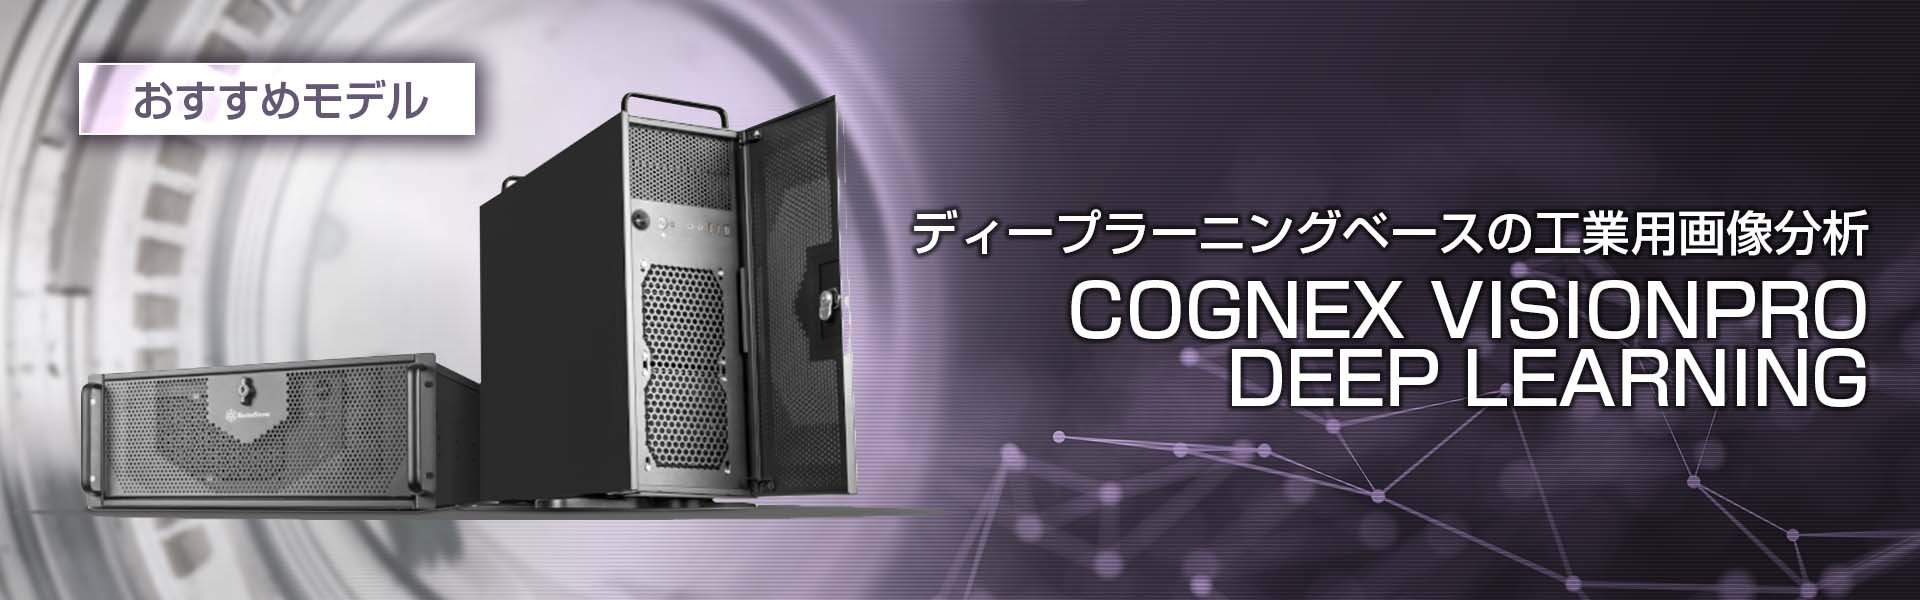 COGNEX VISIONPRO DEEP LEARNING